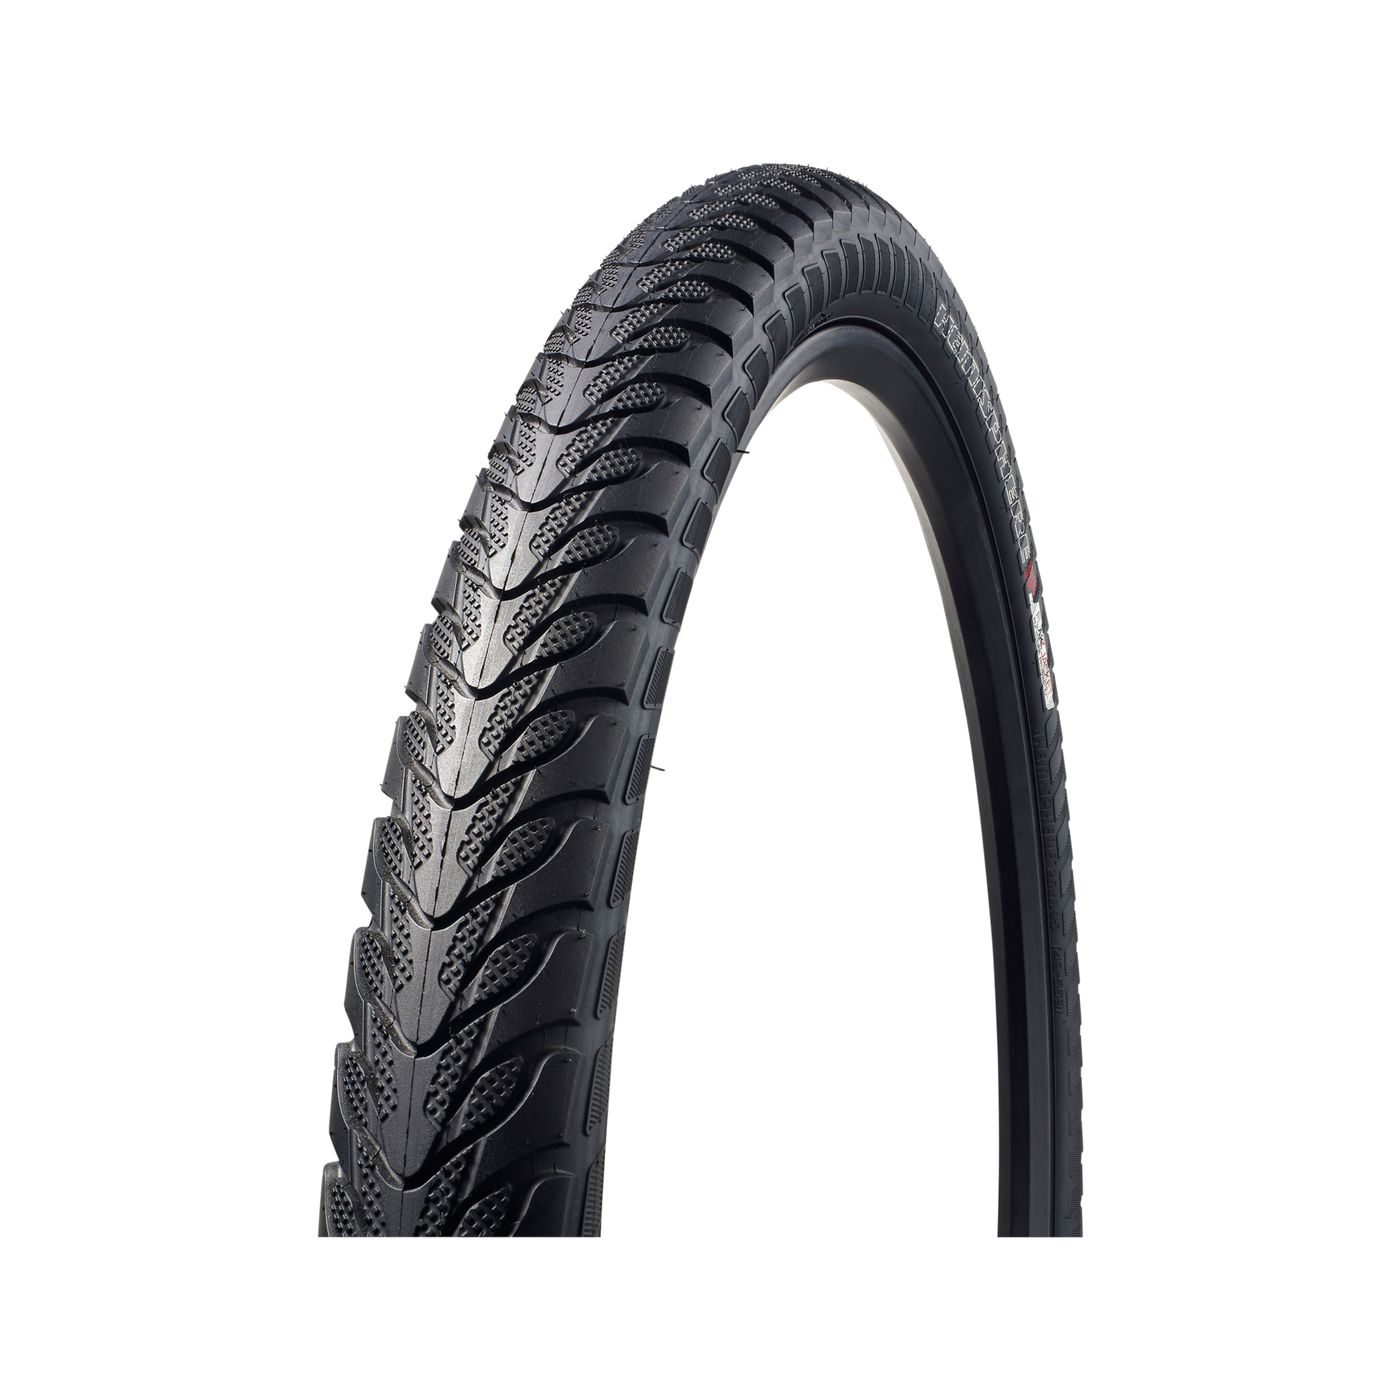 Specialized Hemisphere 700c Bike Tire - Tires - Bicycle Warehouse